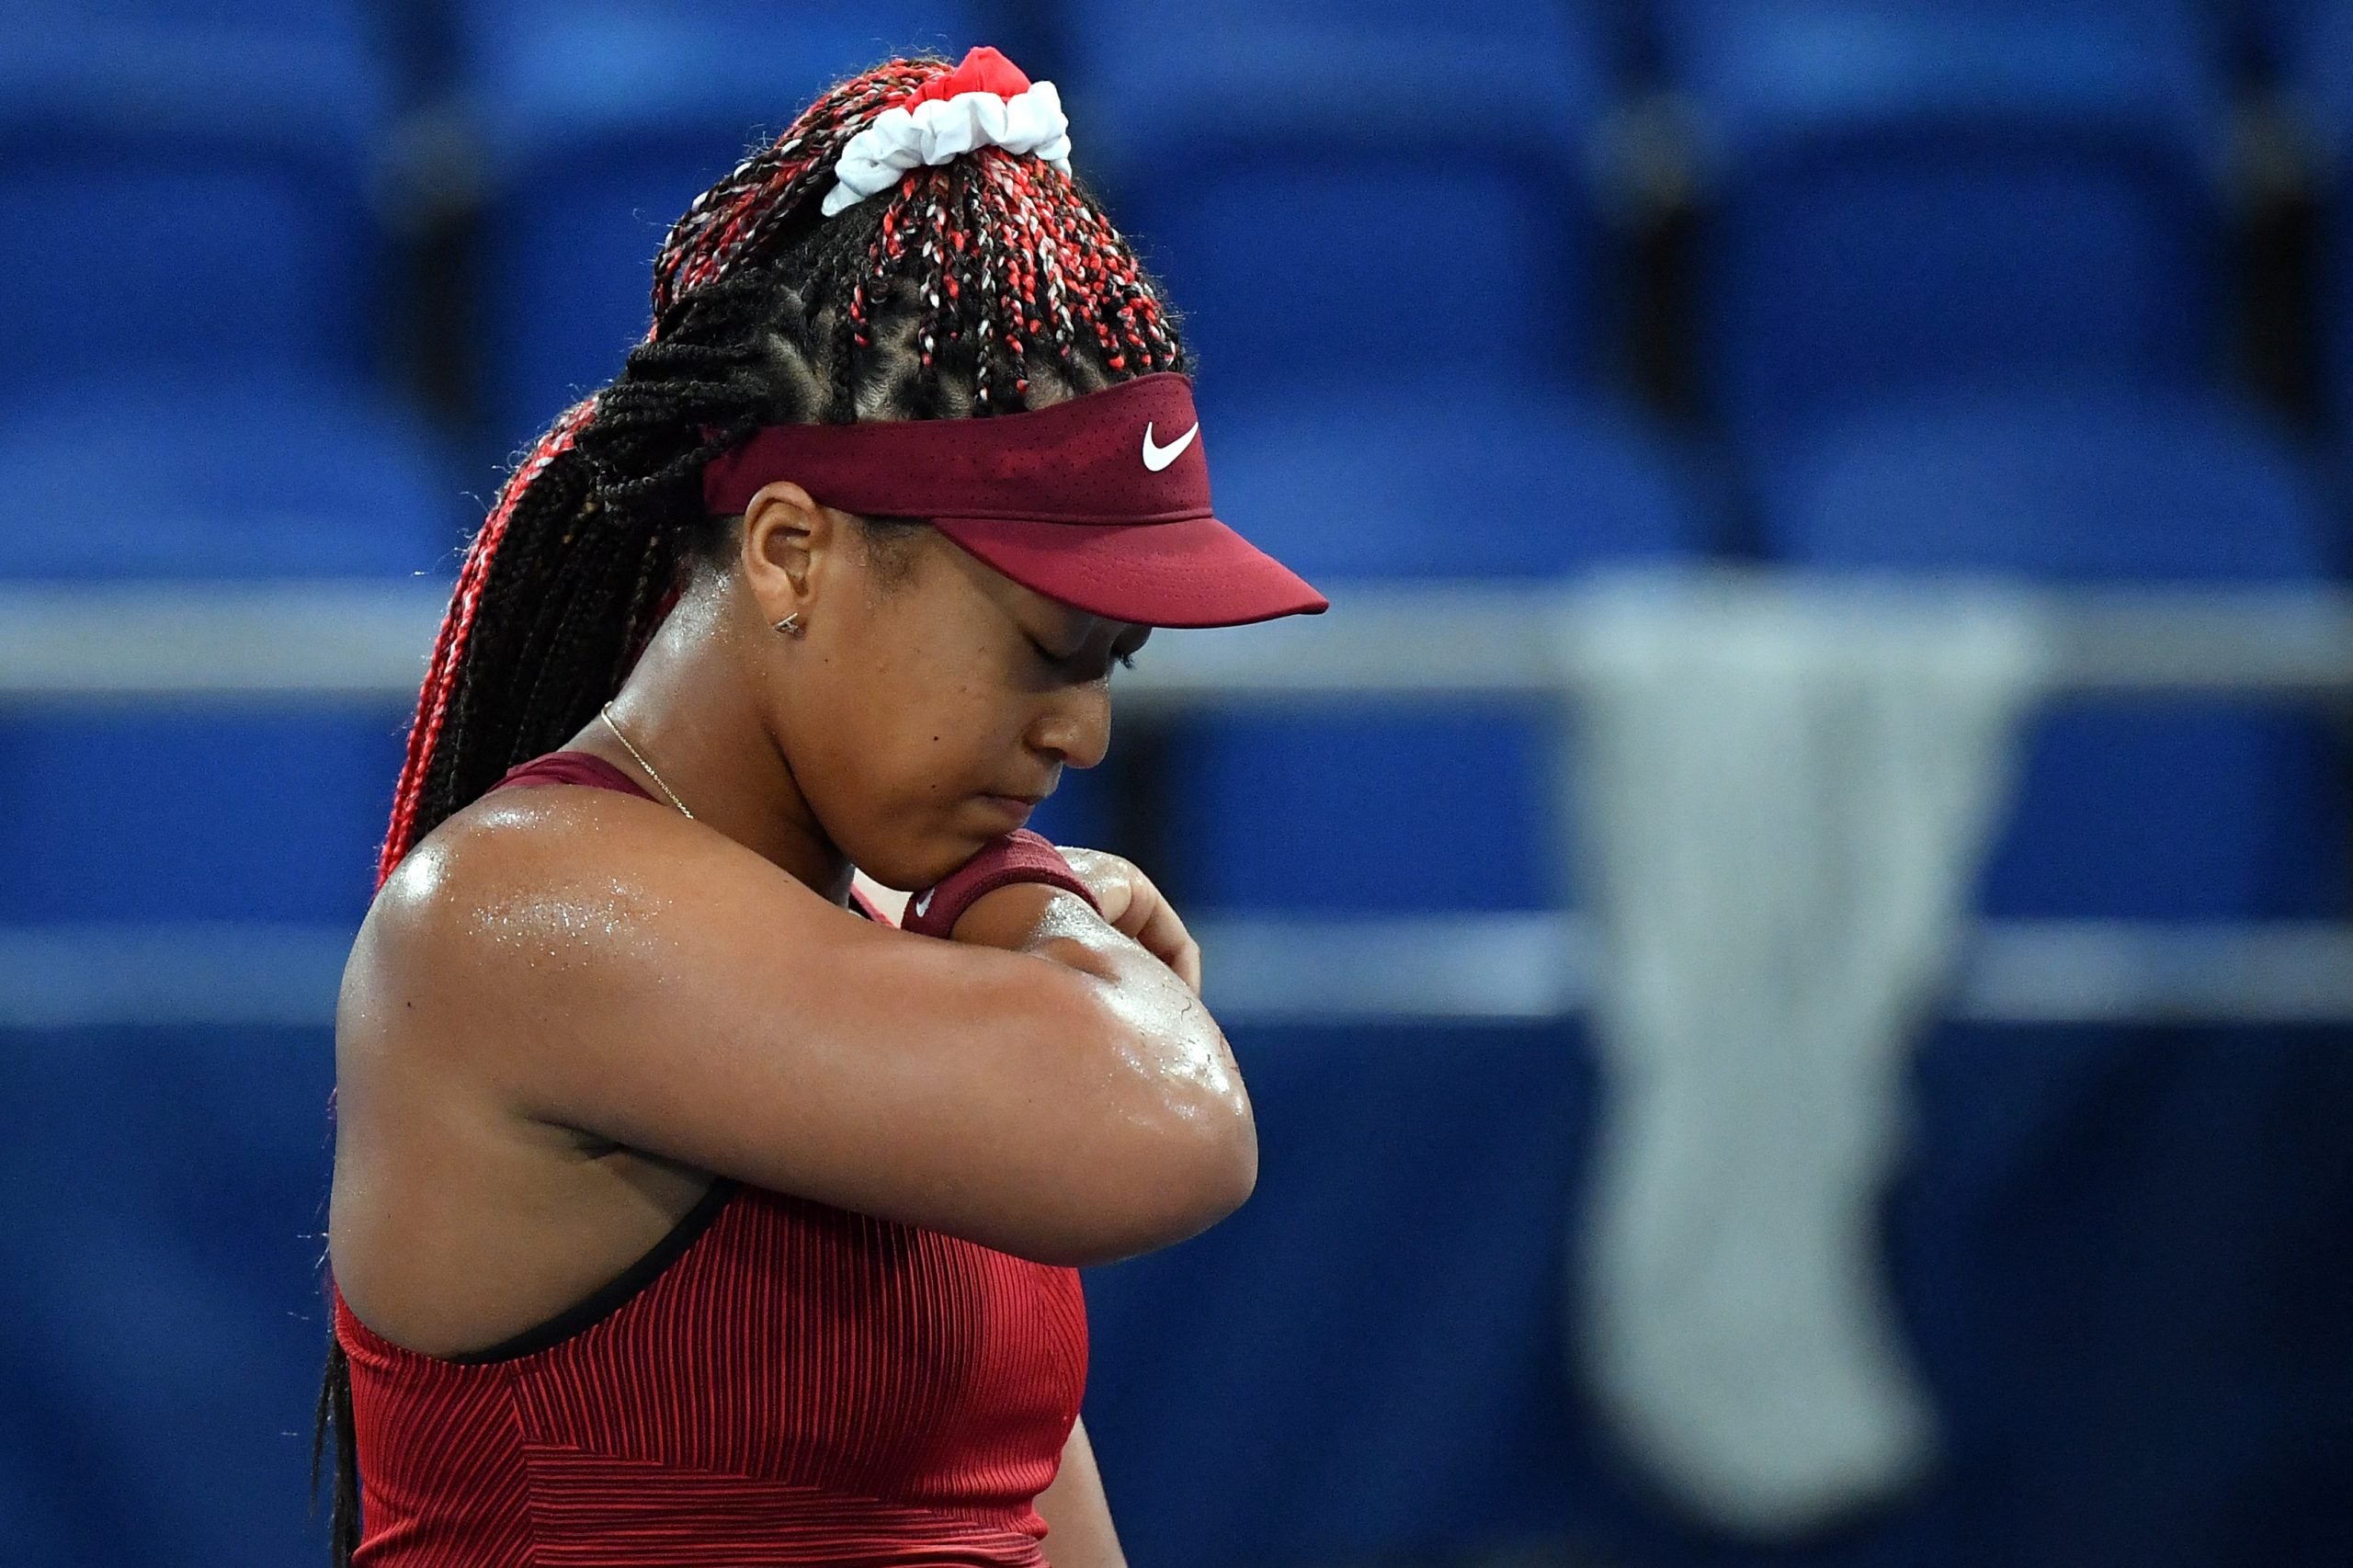 Naomi Osaka Cries After Journalist Asks A Question Her Rep Says Was Meant ‘To Intimidate’